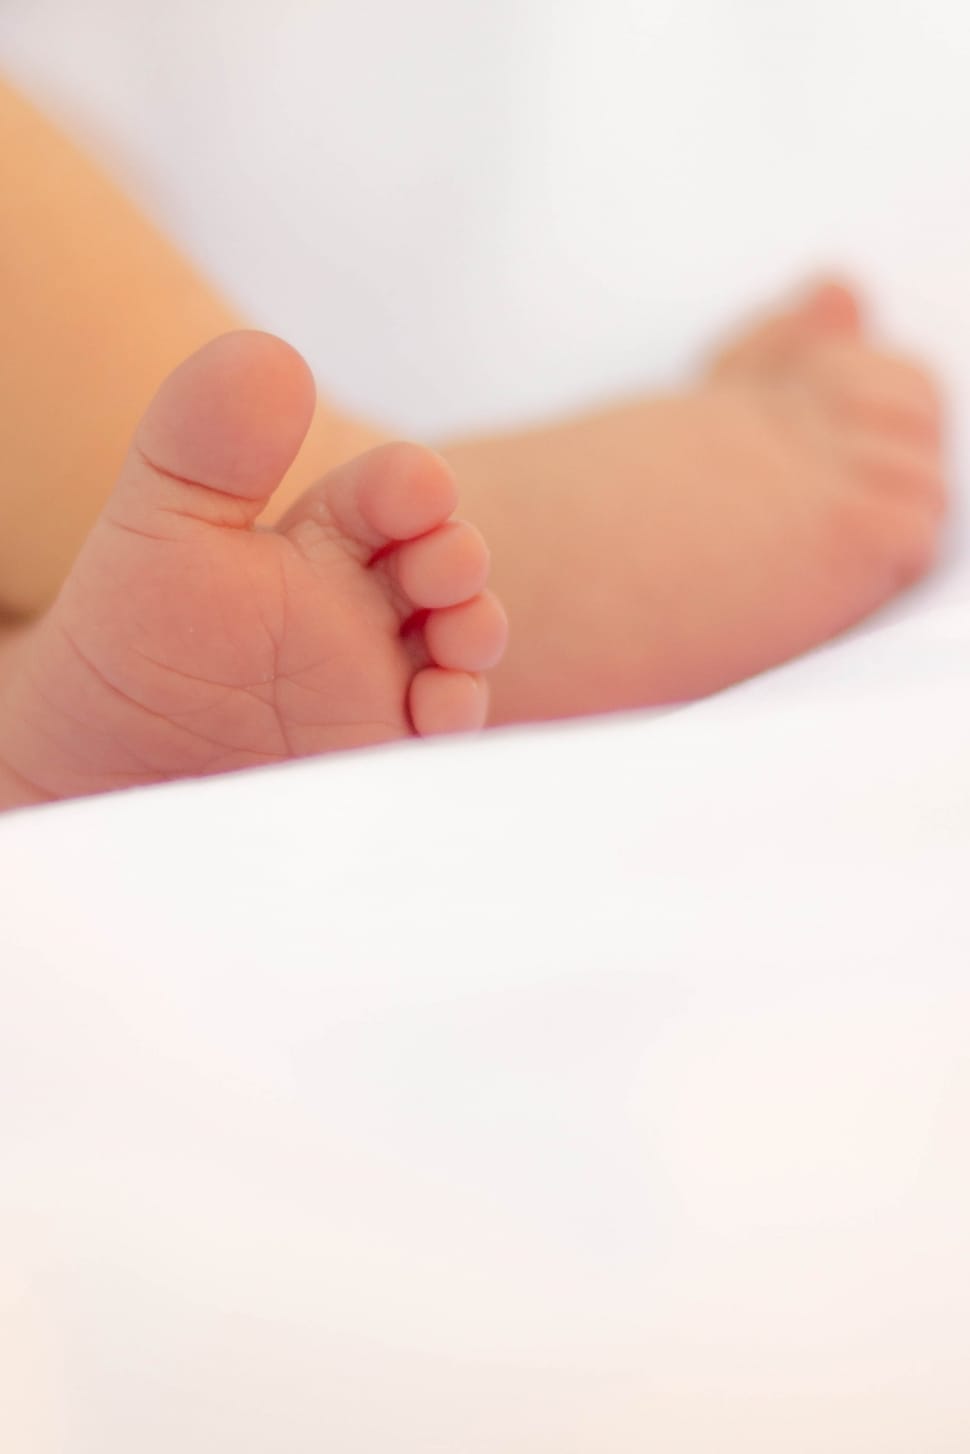 photo showing baby's feet on white textile preview